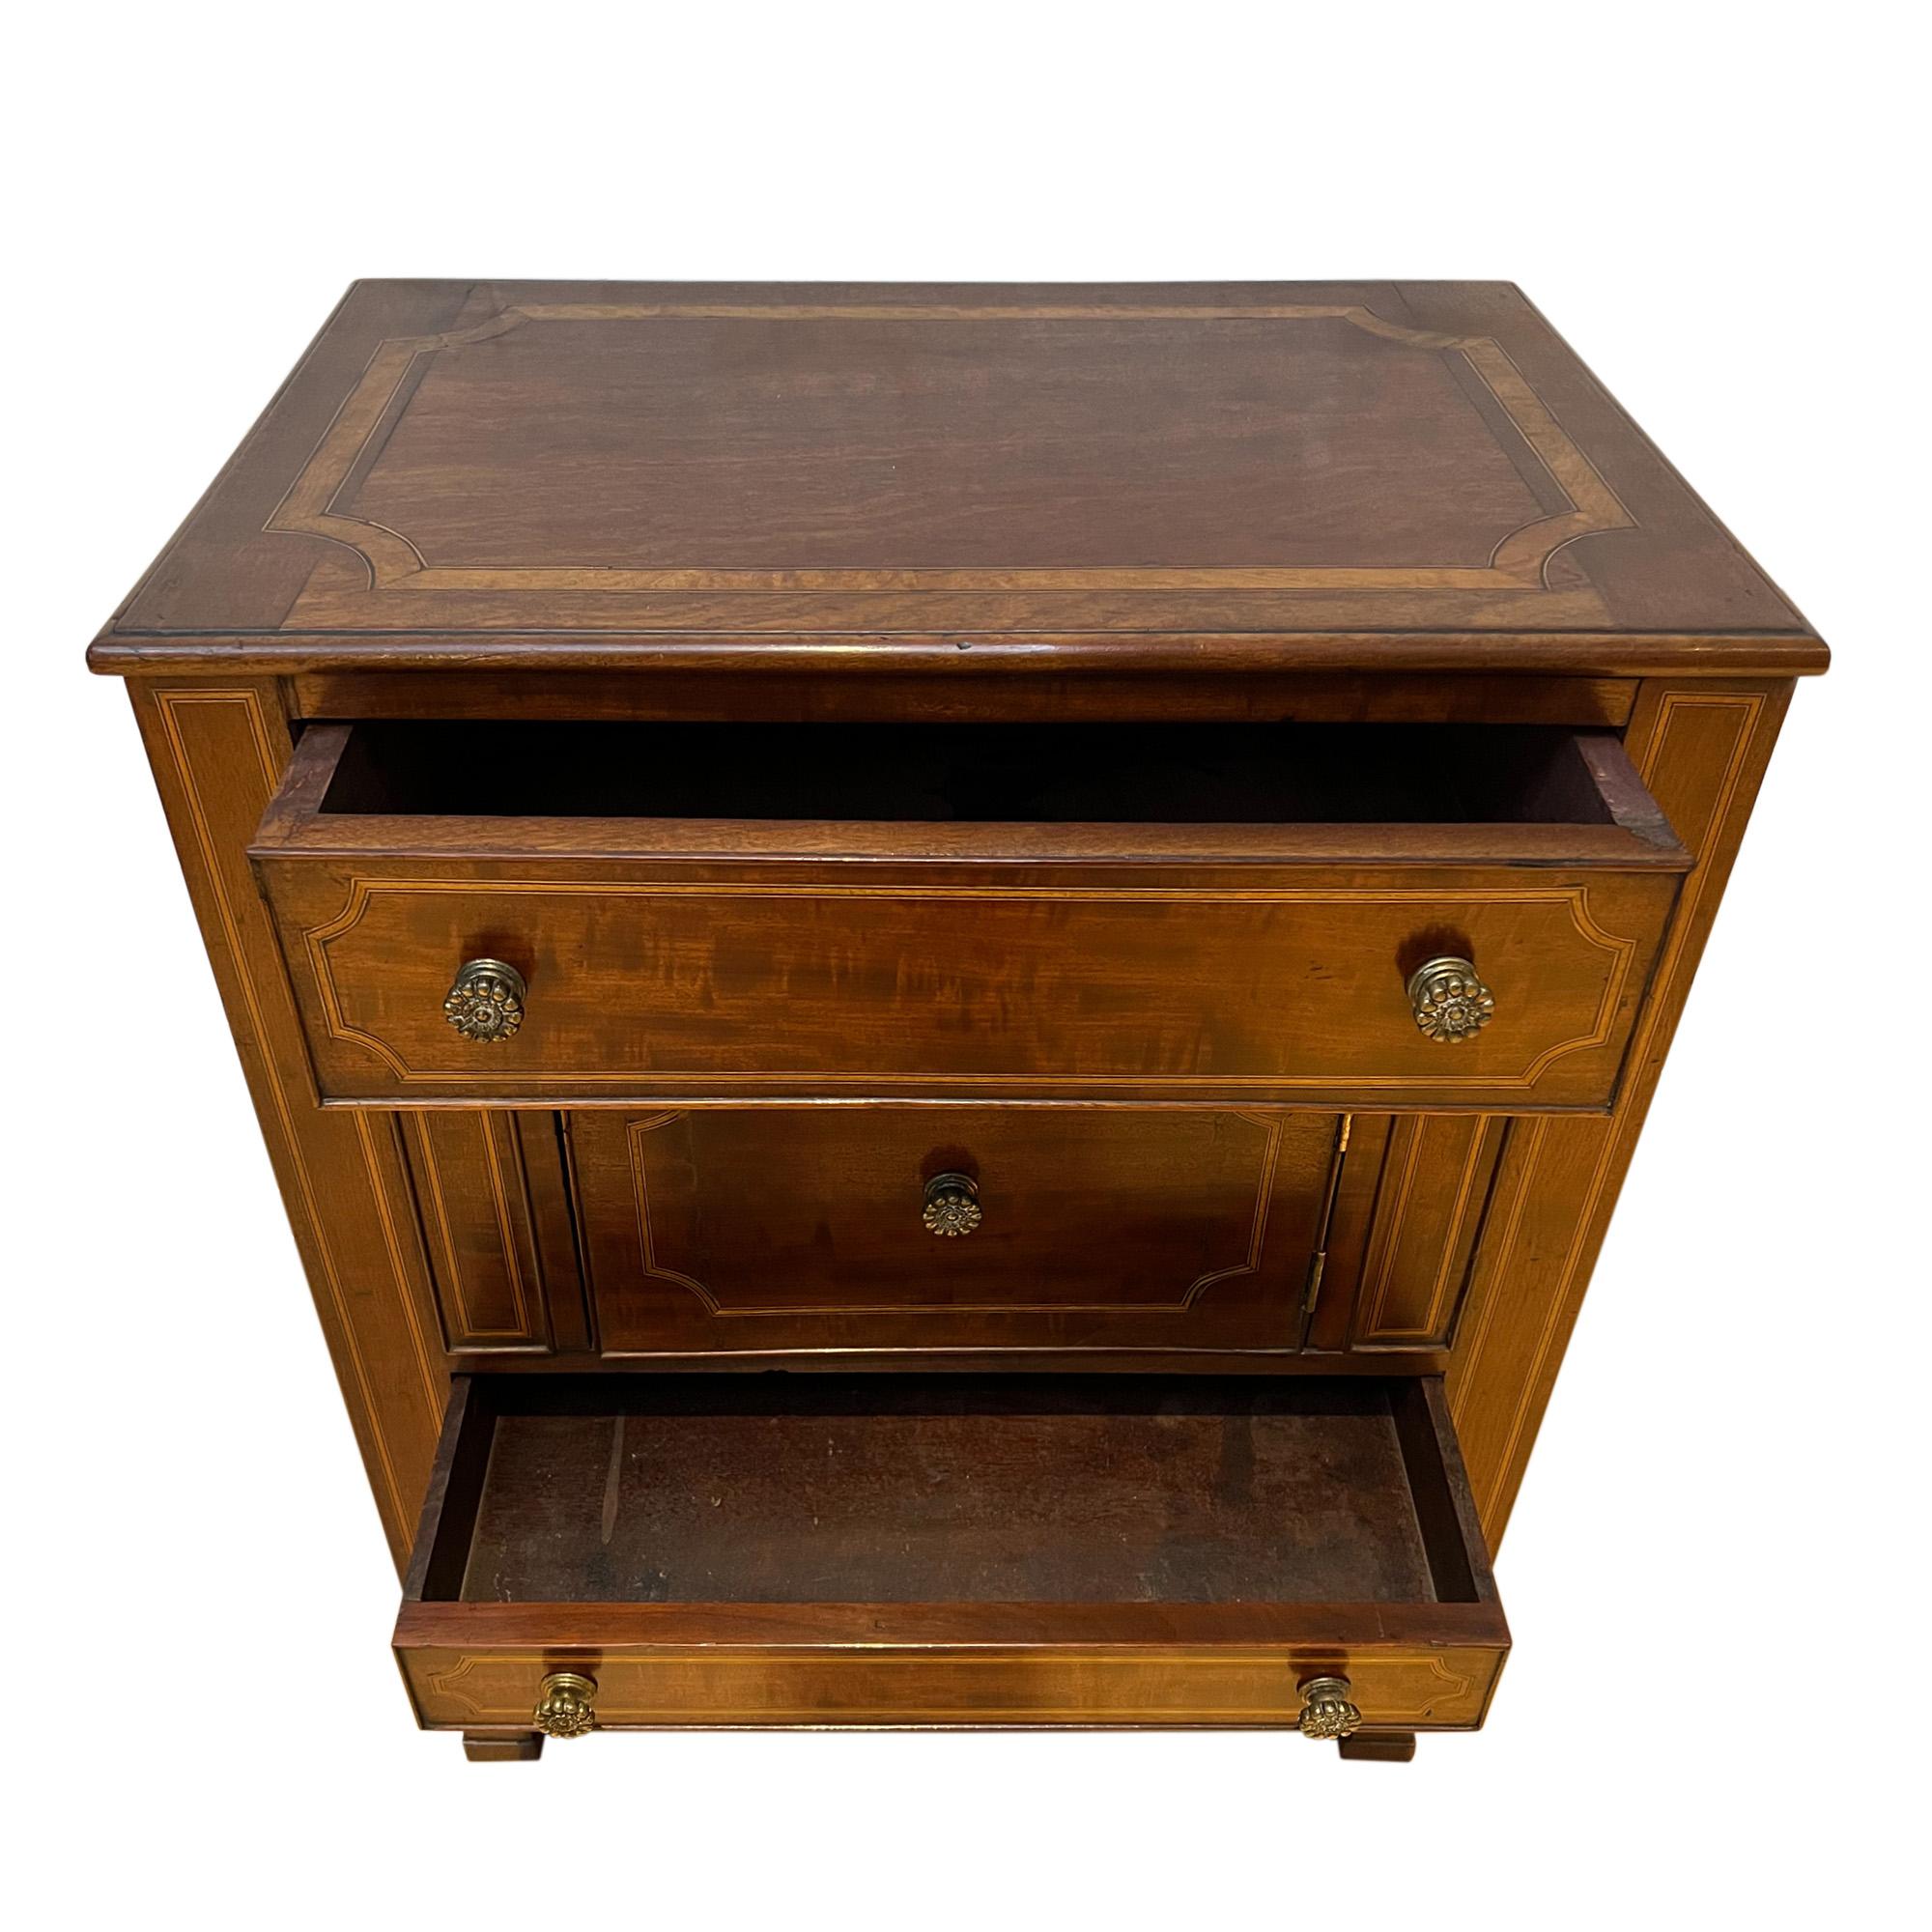 A lovely little nightstand or hall cabinet, this was made in France in the 1900s. 

Crafted from walnut, with satinwood stringing. 

An elegant decorative antique.